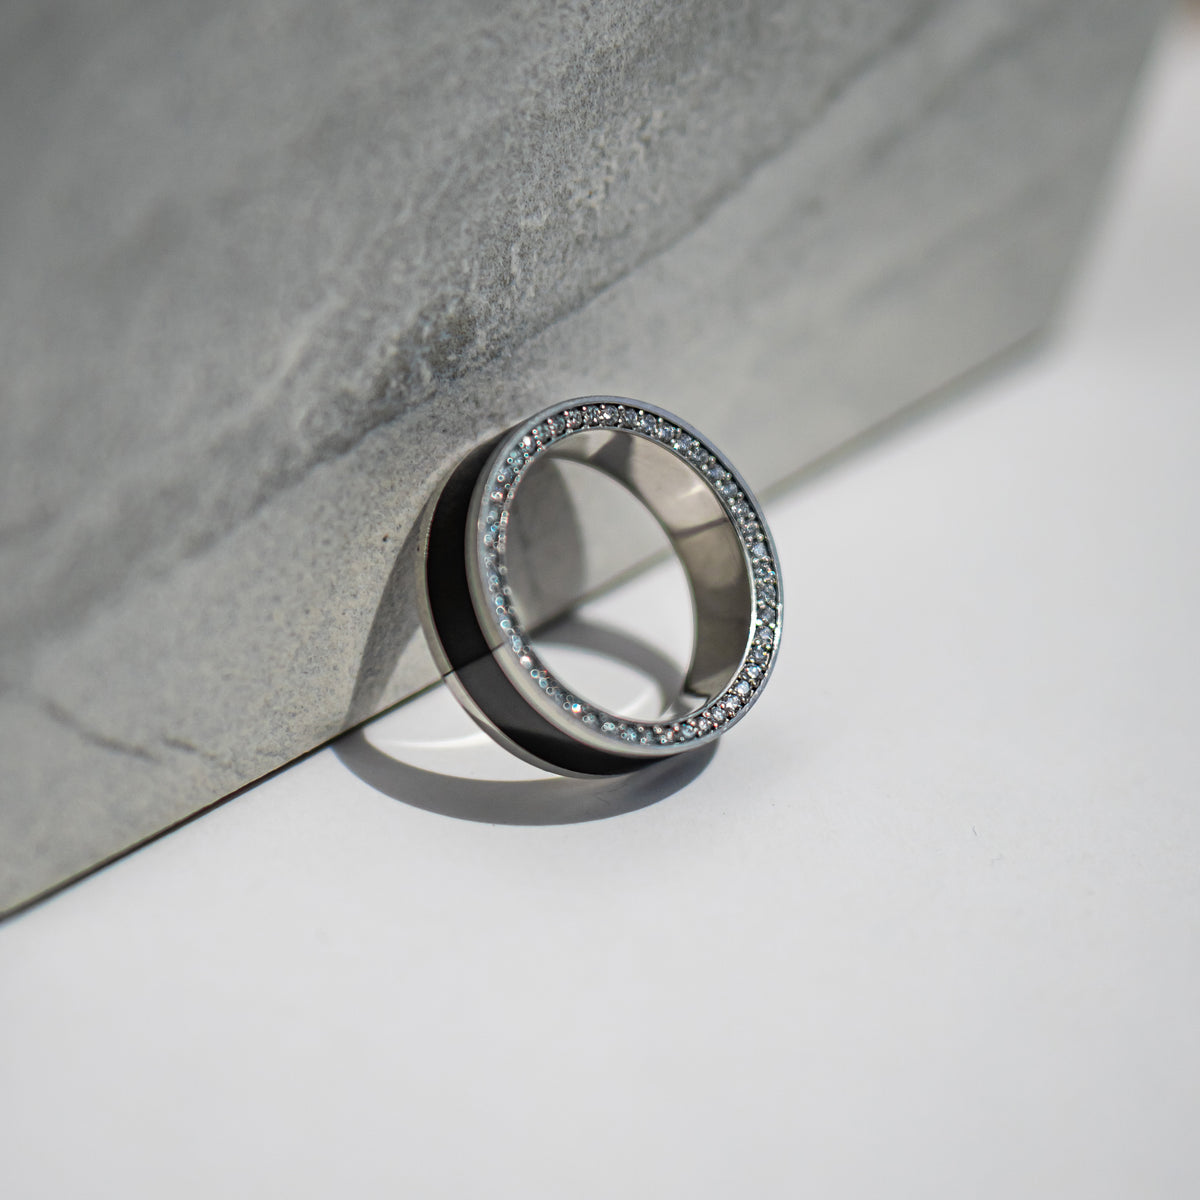 Zeus Polished Reverse Bevel with Diamond Insets in Platinum Ring 7mm